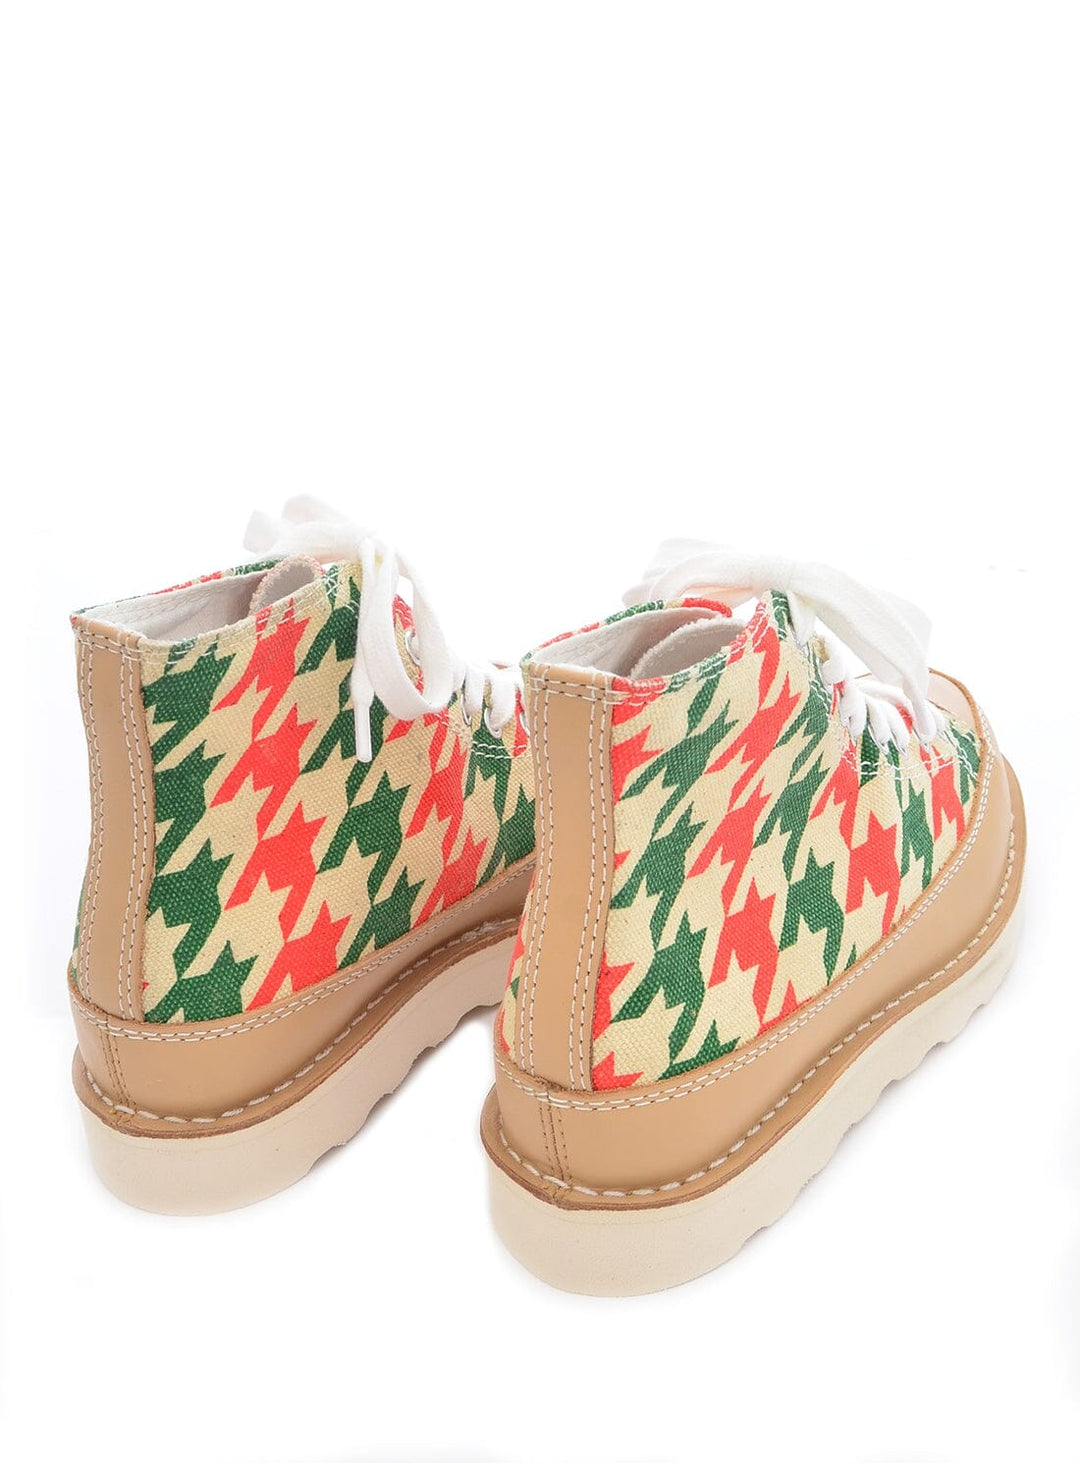 Rope Trainers in Dogstooth Red and Green Shoes YBDFinds 